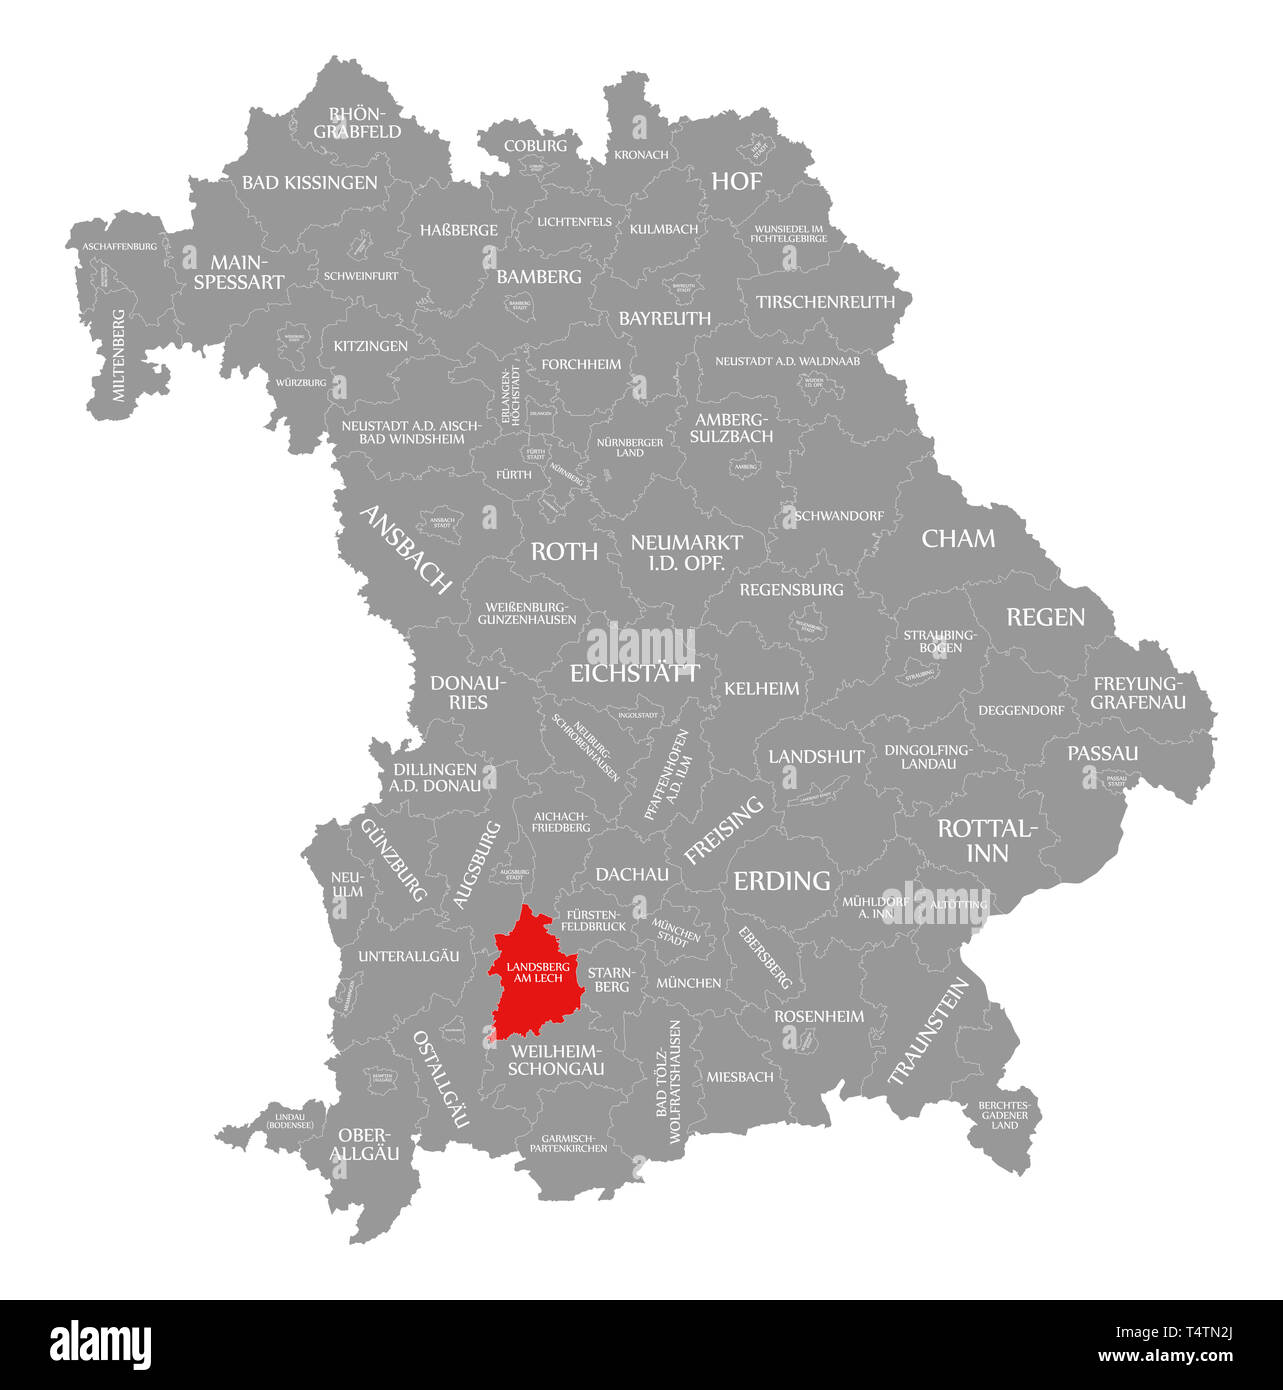 Landsberg am Lech county red highlighted in map of Bavaria Germany Stock Photo